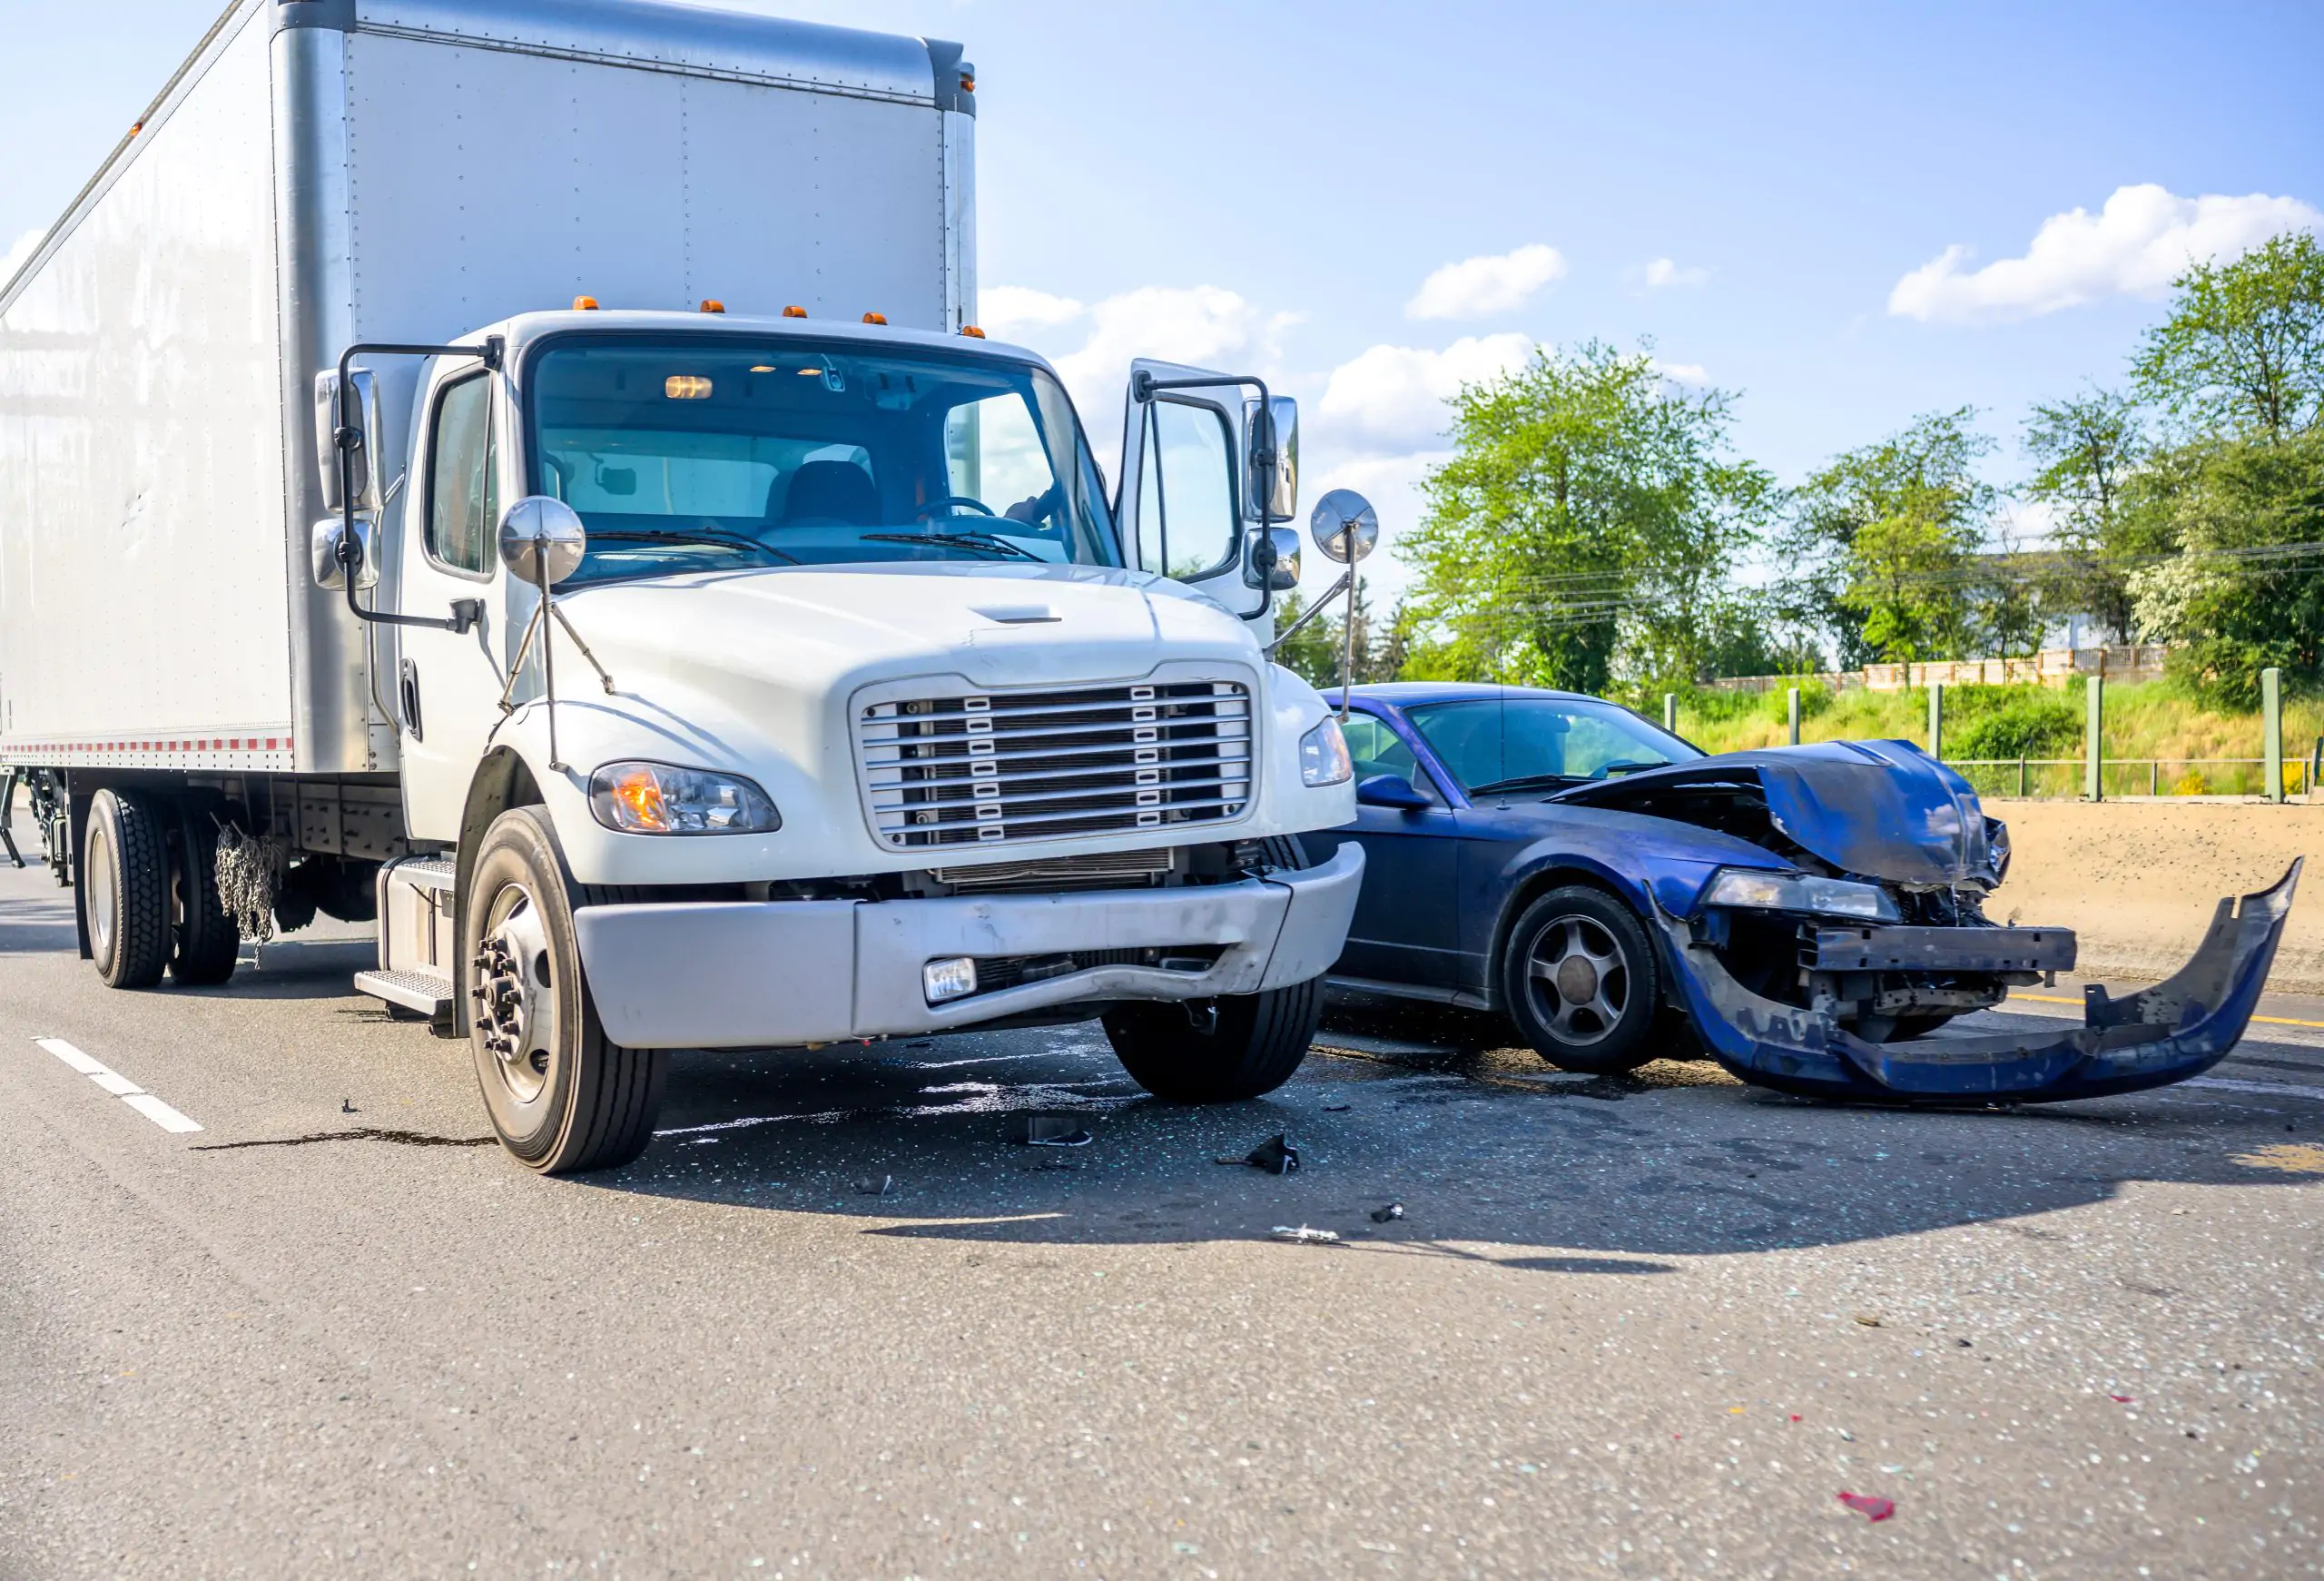 Legal Protections for Semi-Truck Accidents